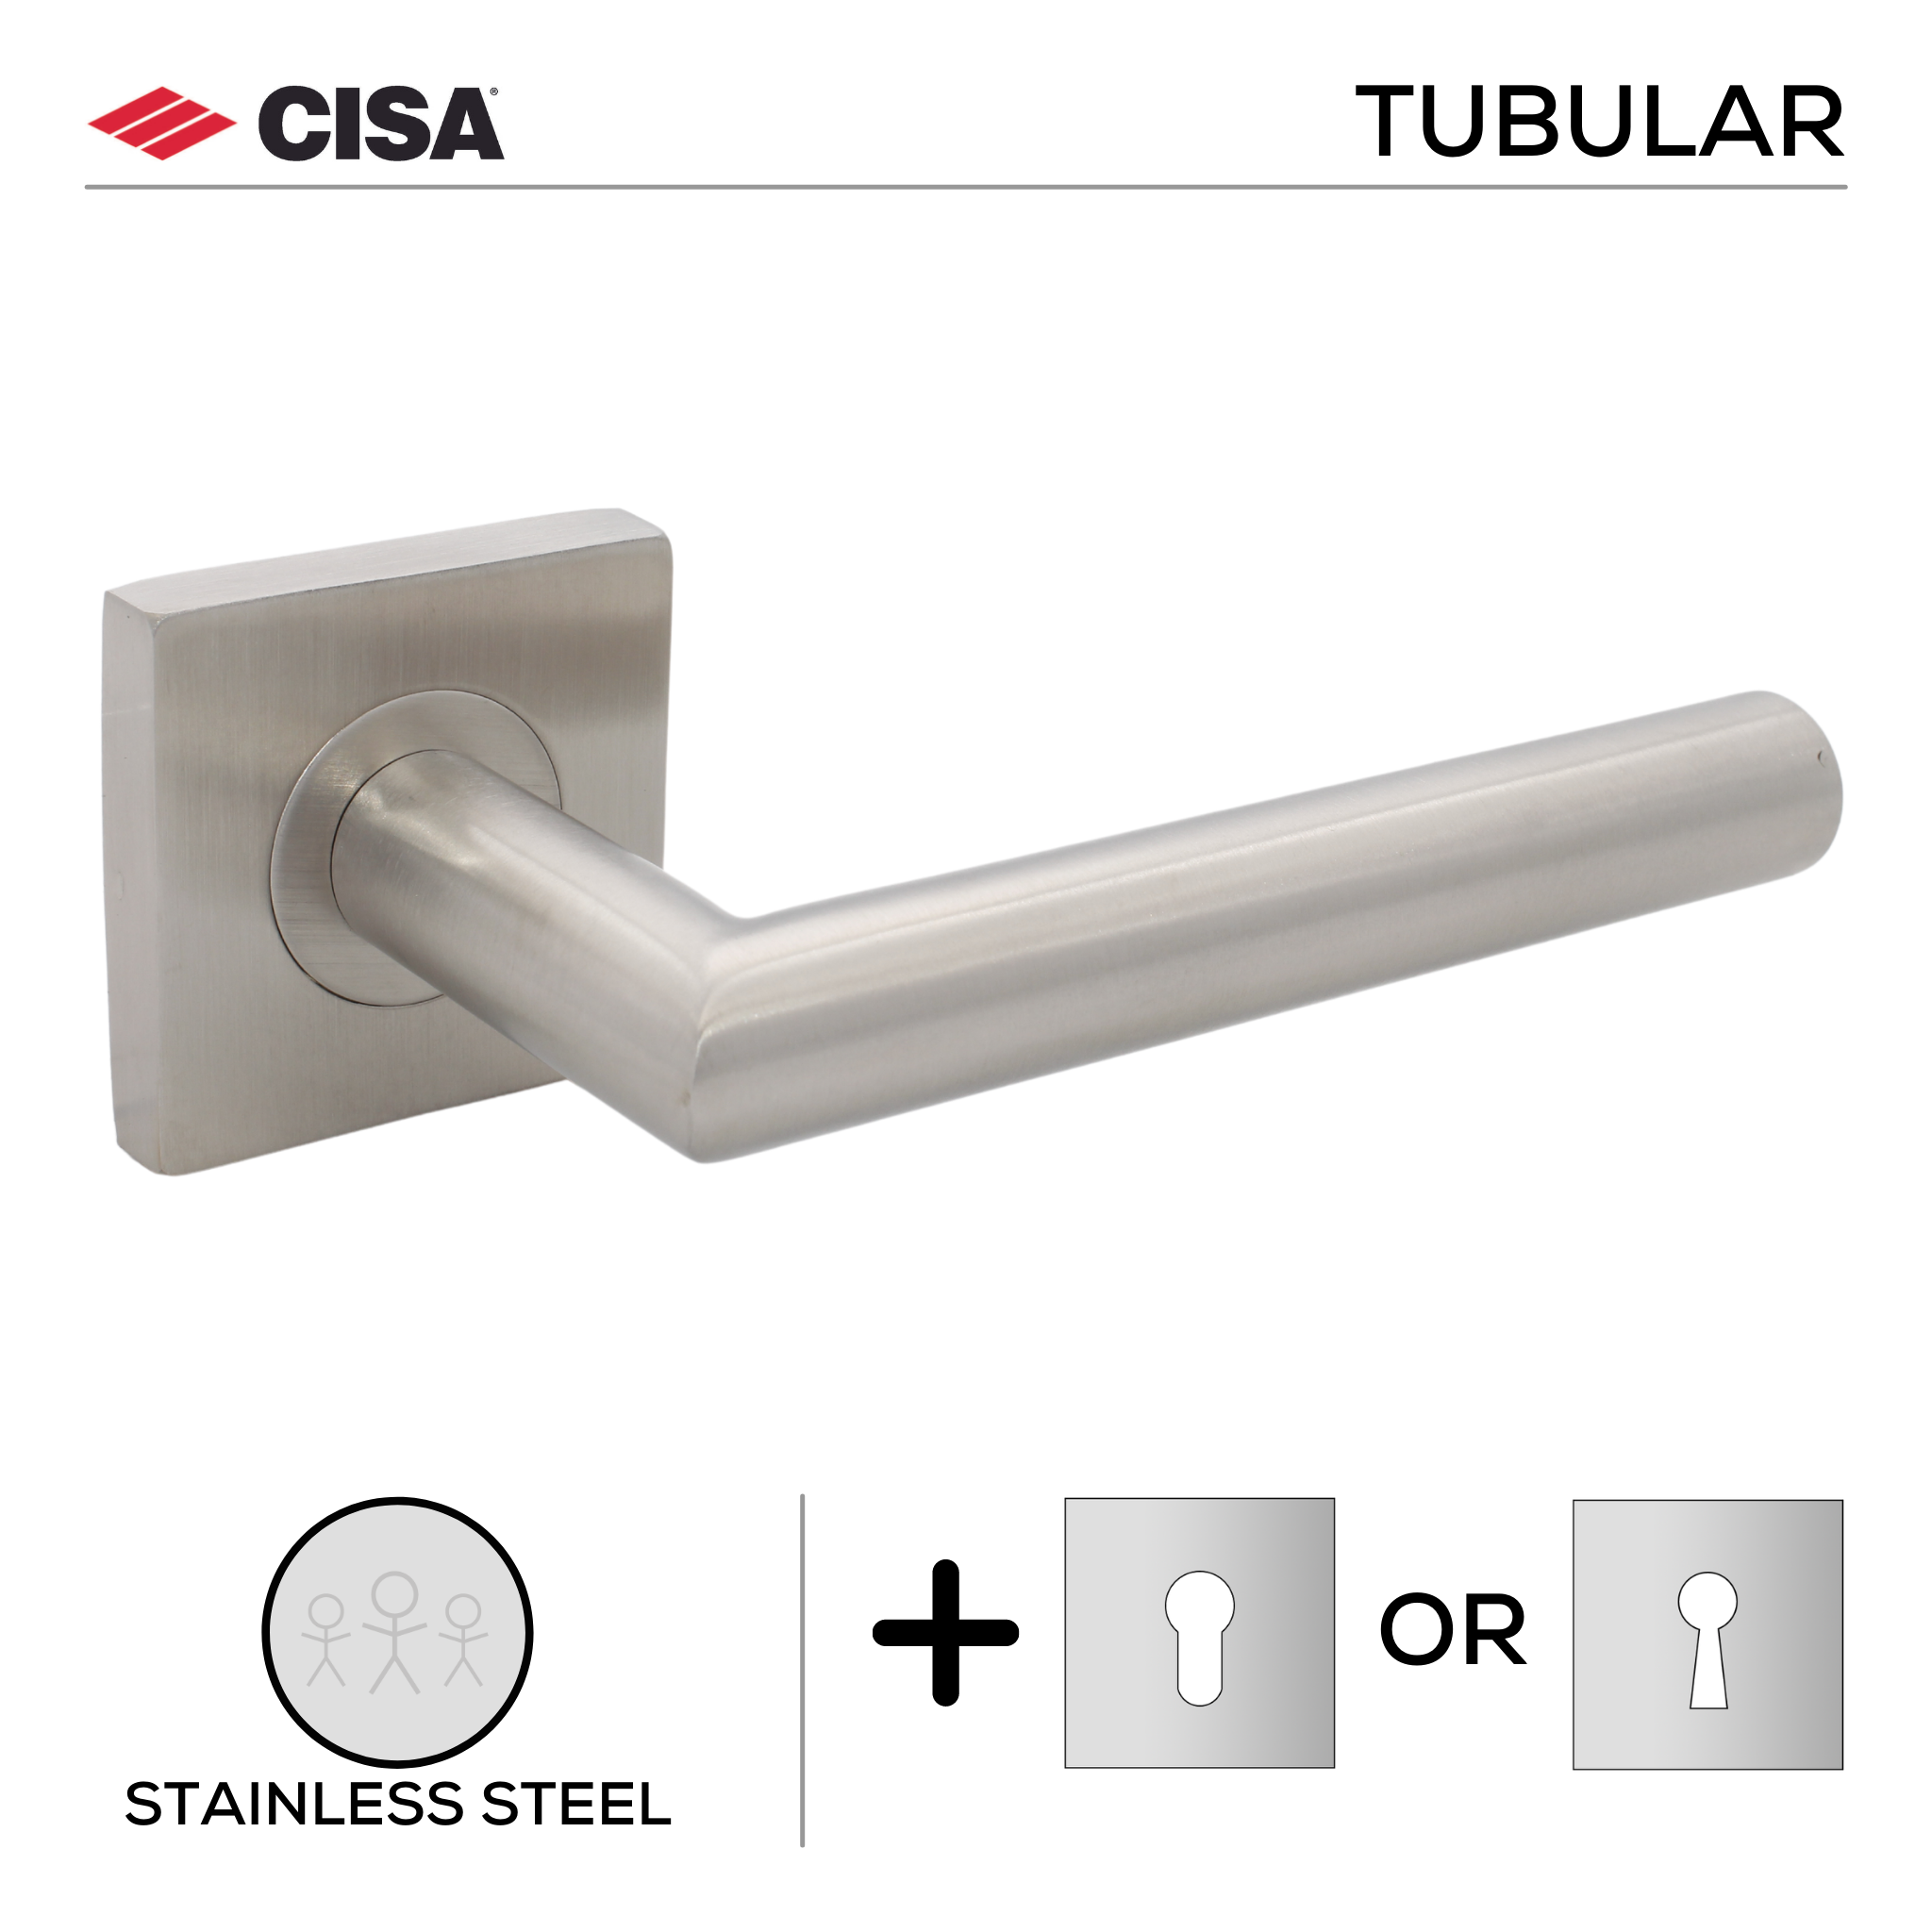 FT02.S._.SS, Lever Handles, Tubular, On Square Rose, With Escutcheons, 134mm (l), Stainless Steel, CISA